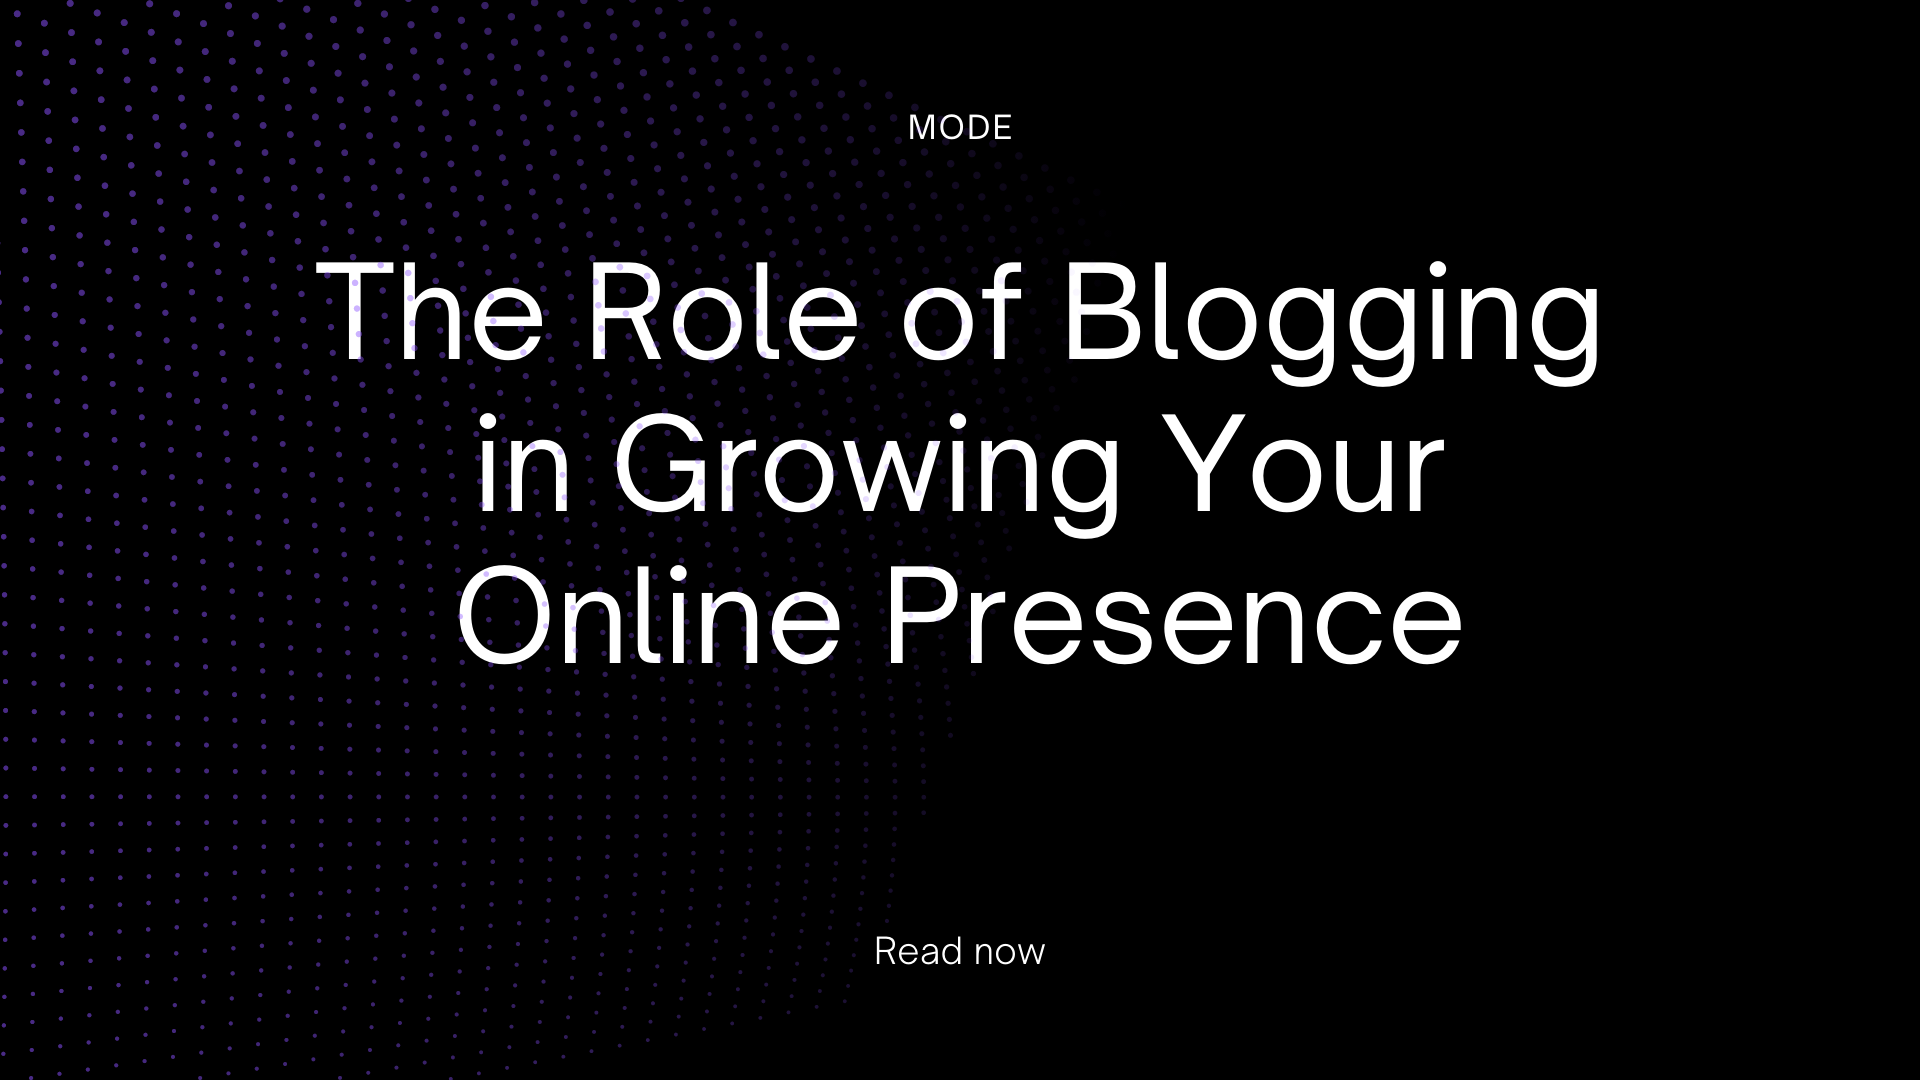 The Role of Blogging in Growing Your Online Presence